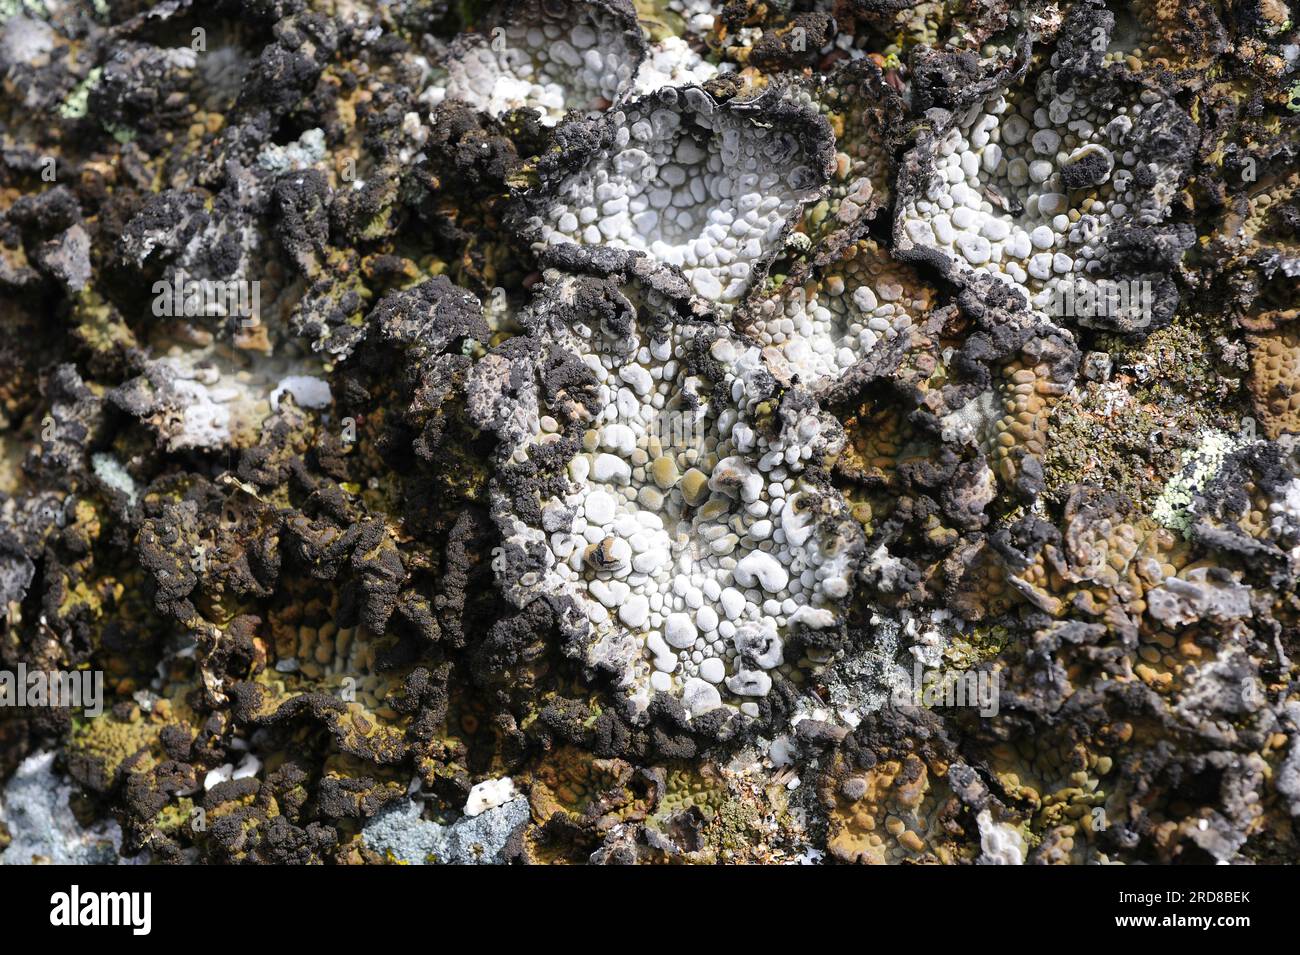 Rock tripe (Umbilicaria pustulata or Lasallia pustulata) is an umbilicate lichen with the upper thallus surface with convex pustules; its color varies Stock Photo